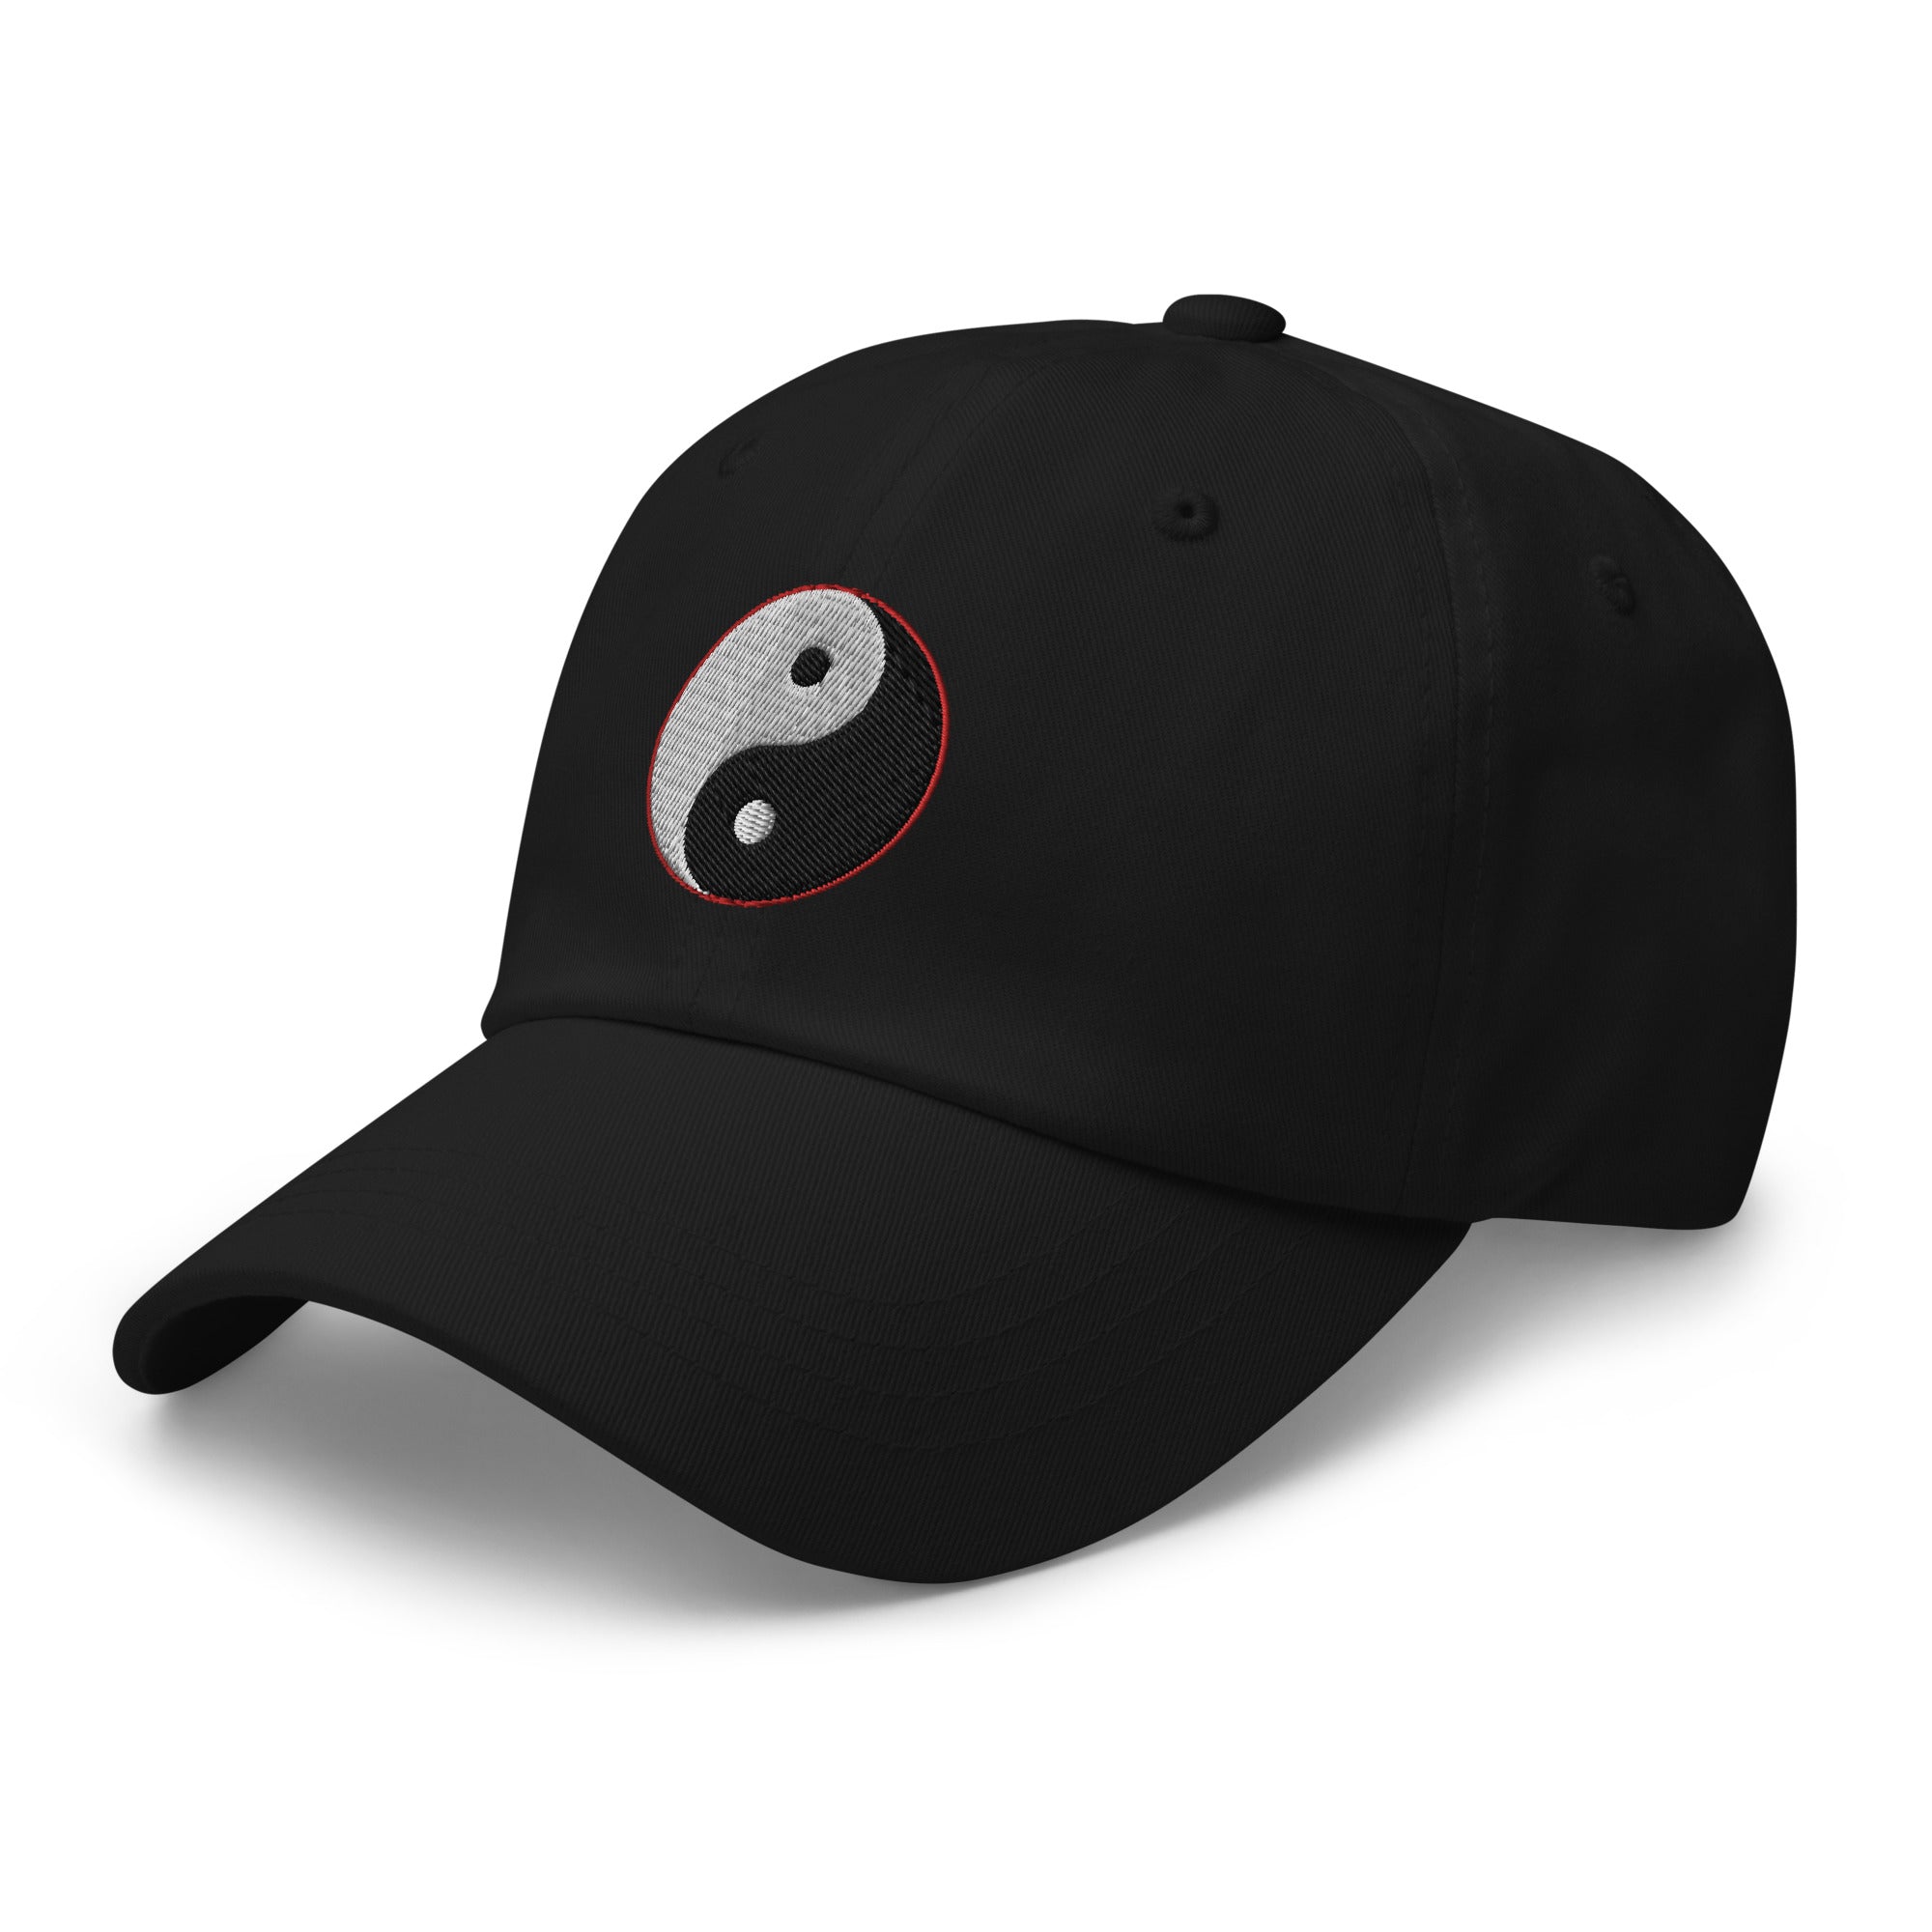 Yin and Yang Chinese Symbol Embroidered Baseball Cap Dad hat - Edge of Life Designs